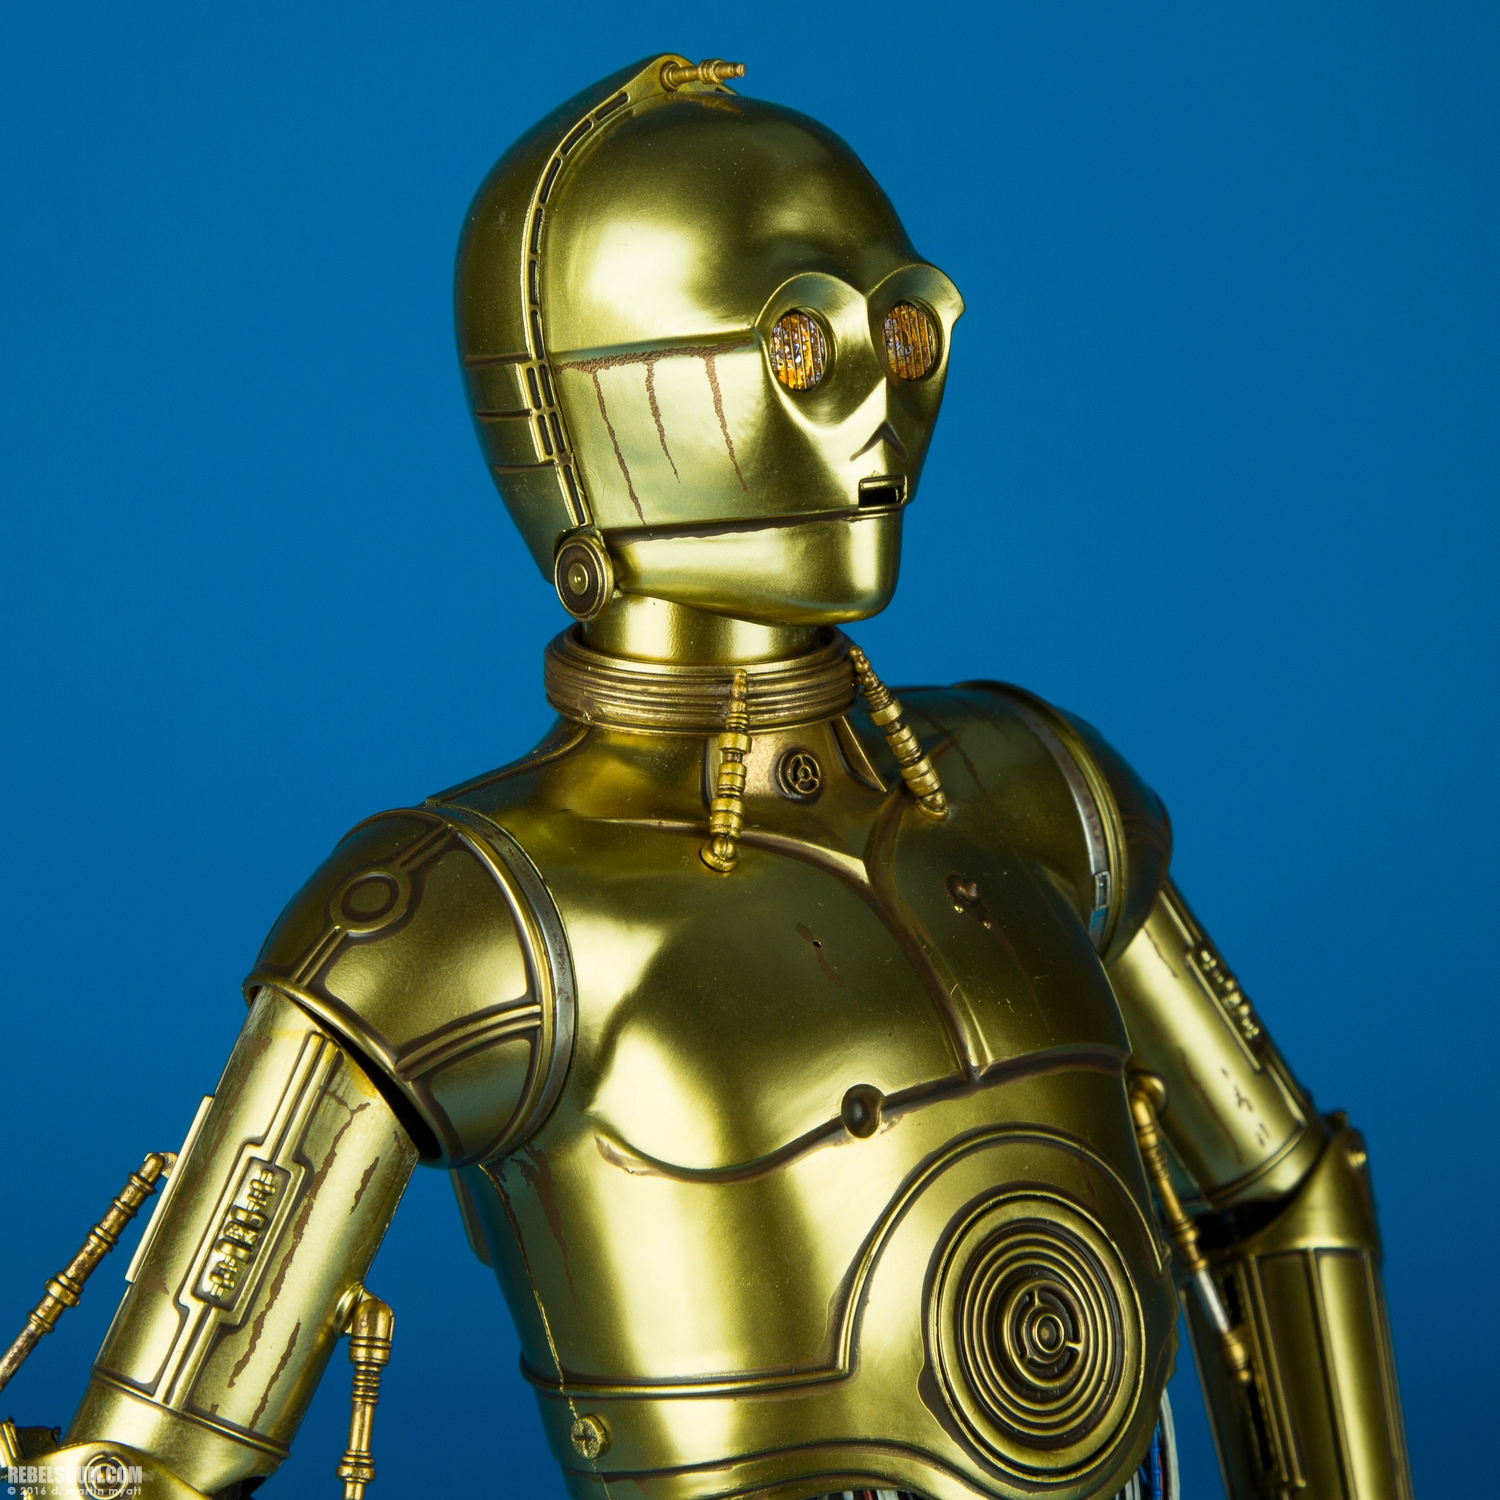 C-3PO-Sixth-Scale-Figure-Sideshow-Collectibles-010.jpg